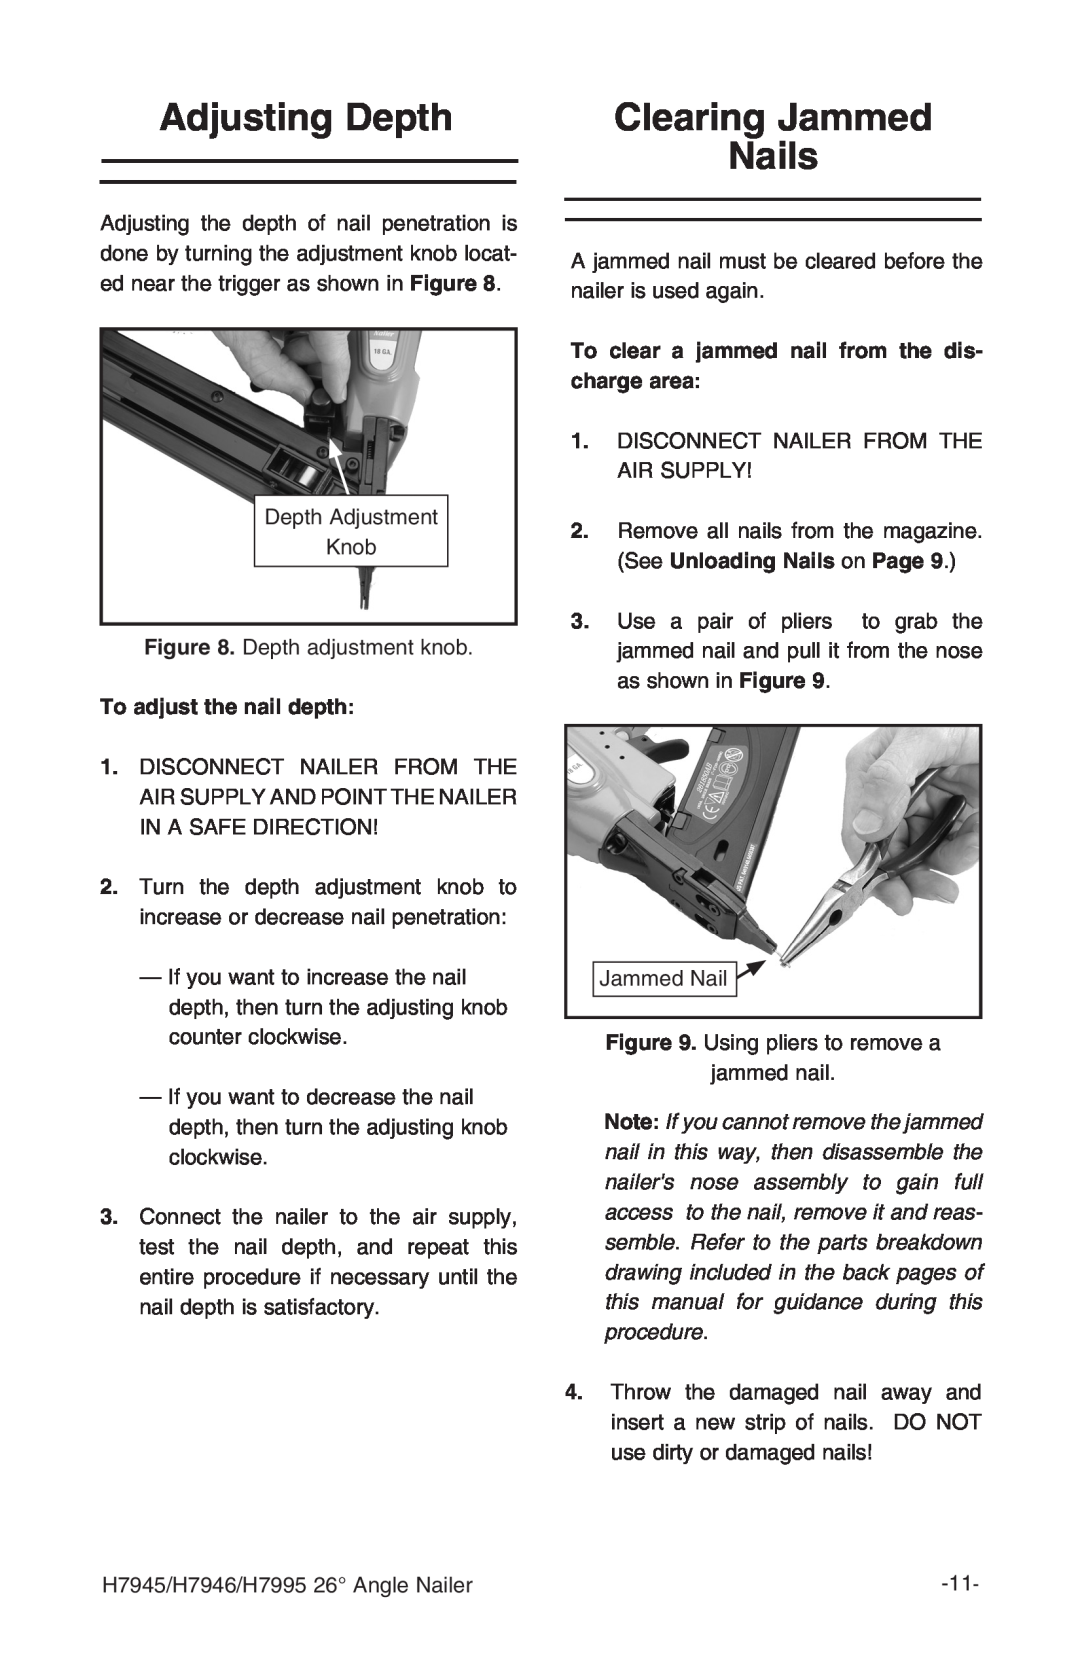 Grizzly H7995, H7946 instruction manual Adjusting Depth, Clearing Jammed, Nails 